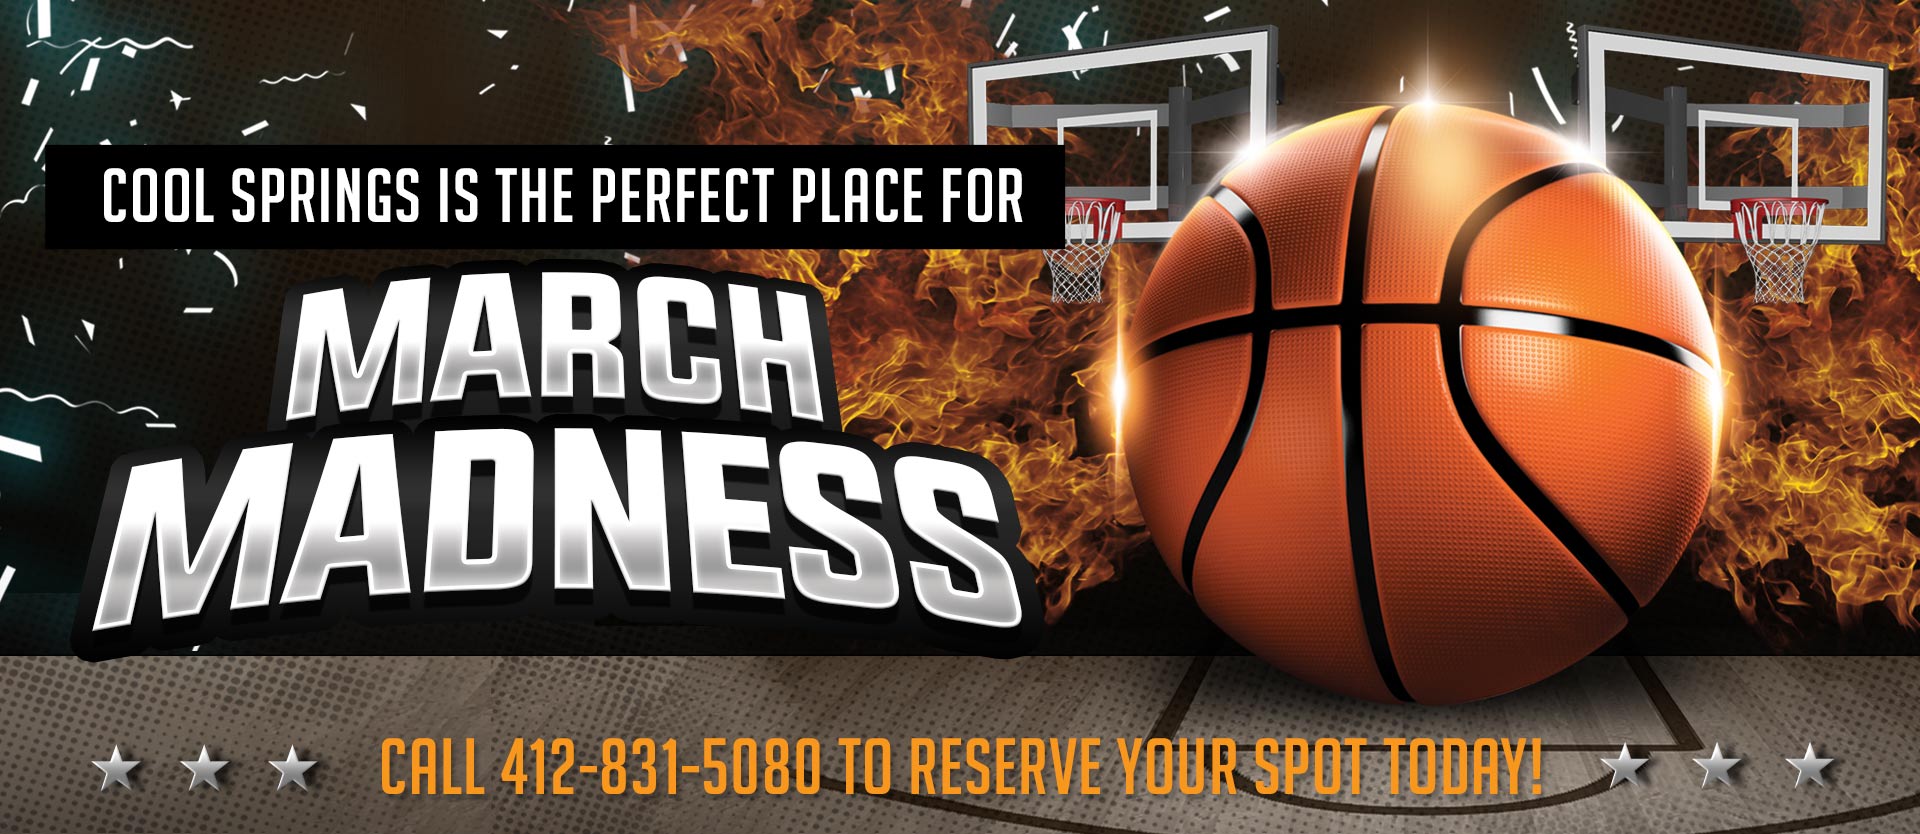 March madness at Cool Springs pa